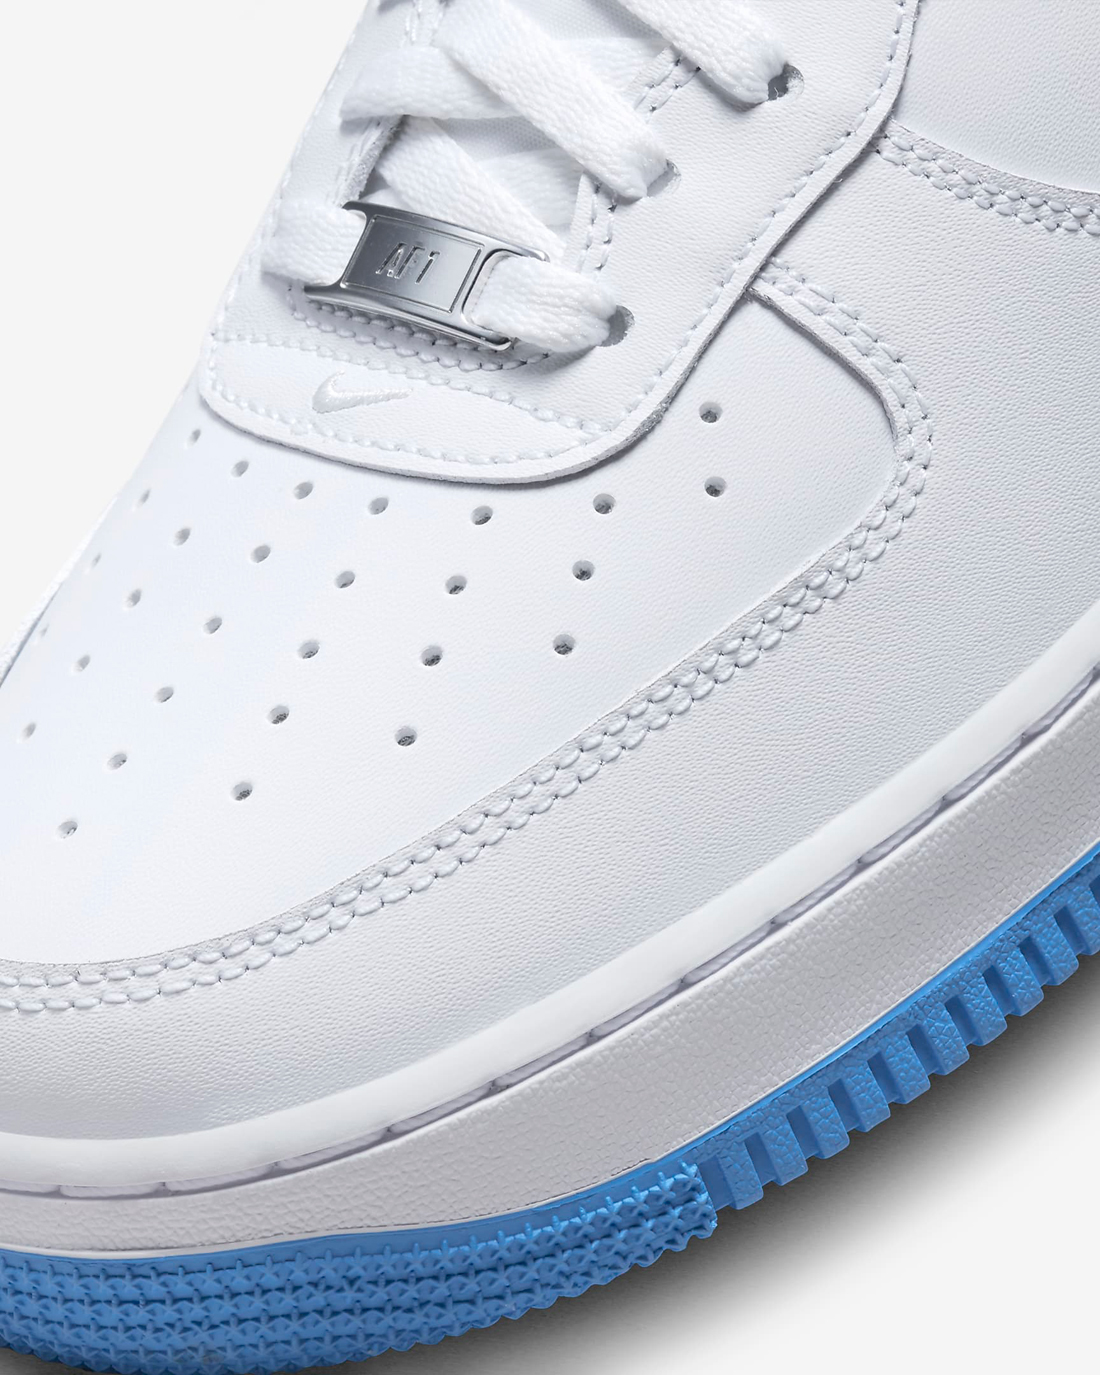 Nike-Air-Force-1-Low-White-University-Blue-Release-Date-Info-7